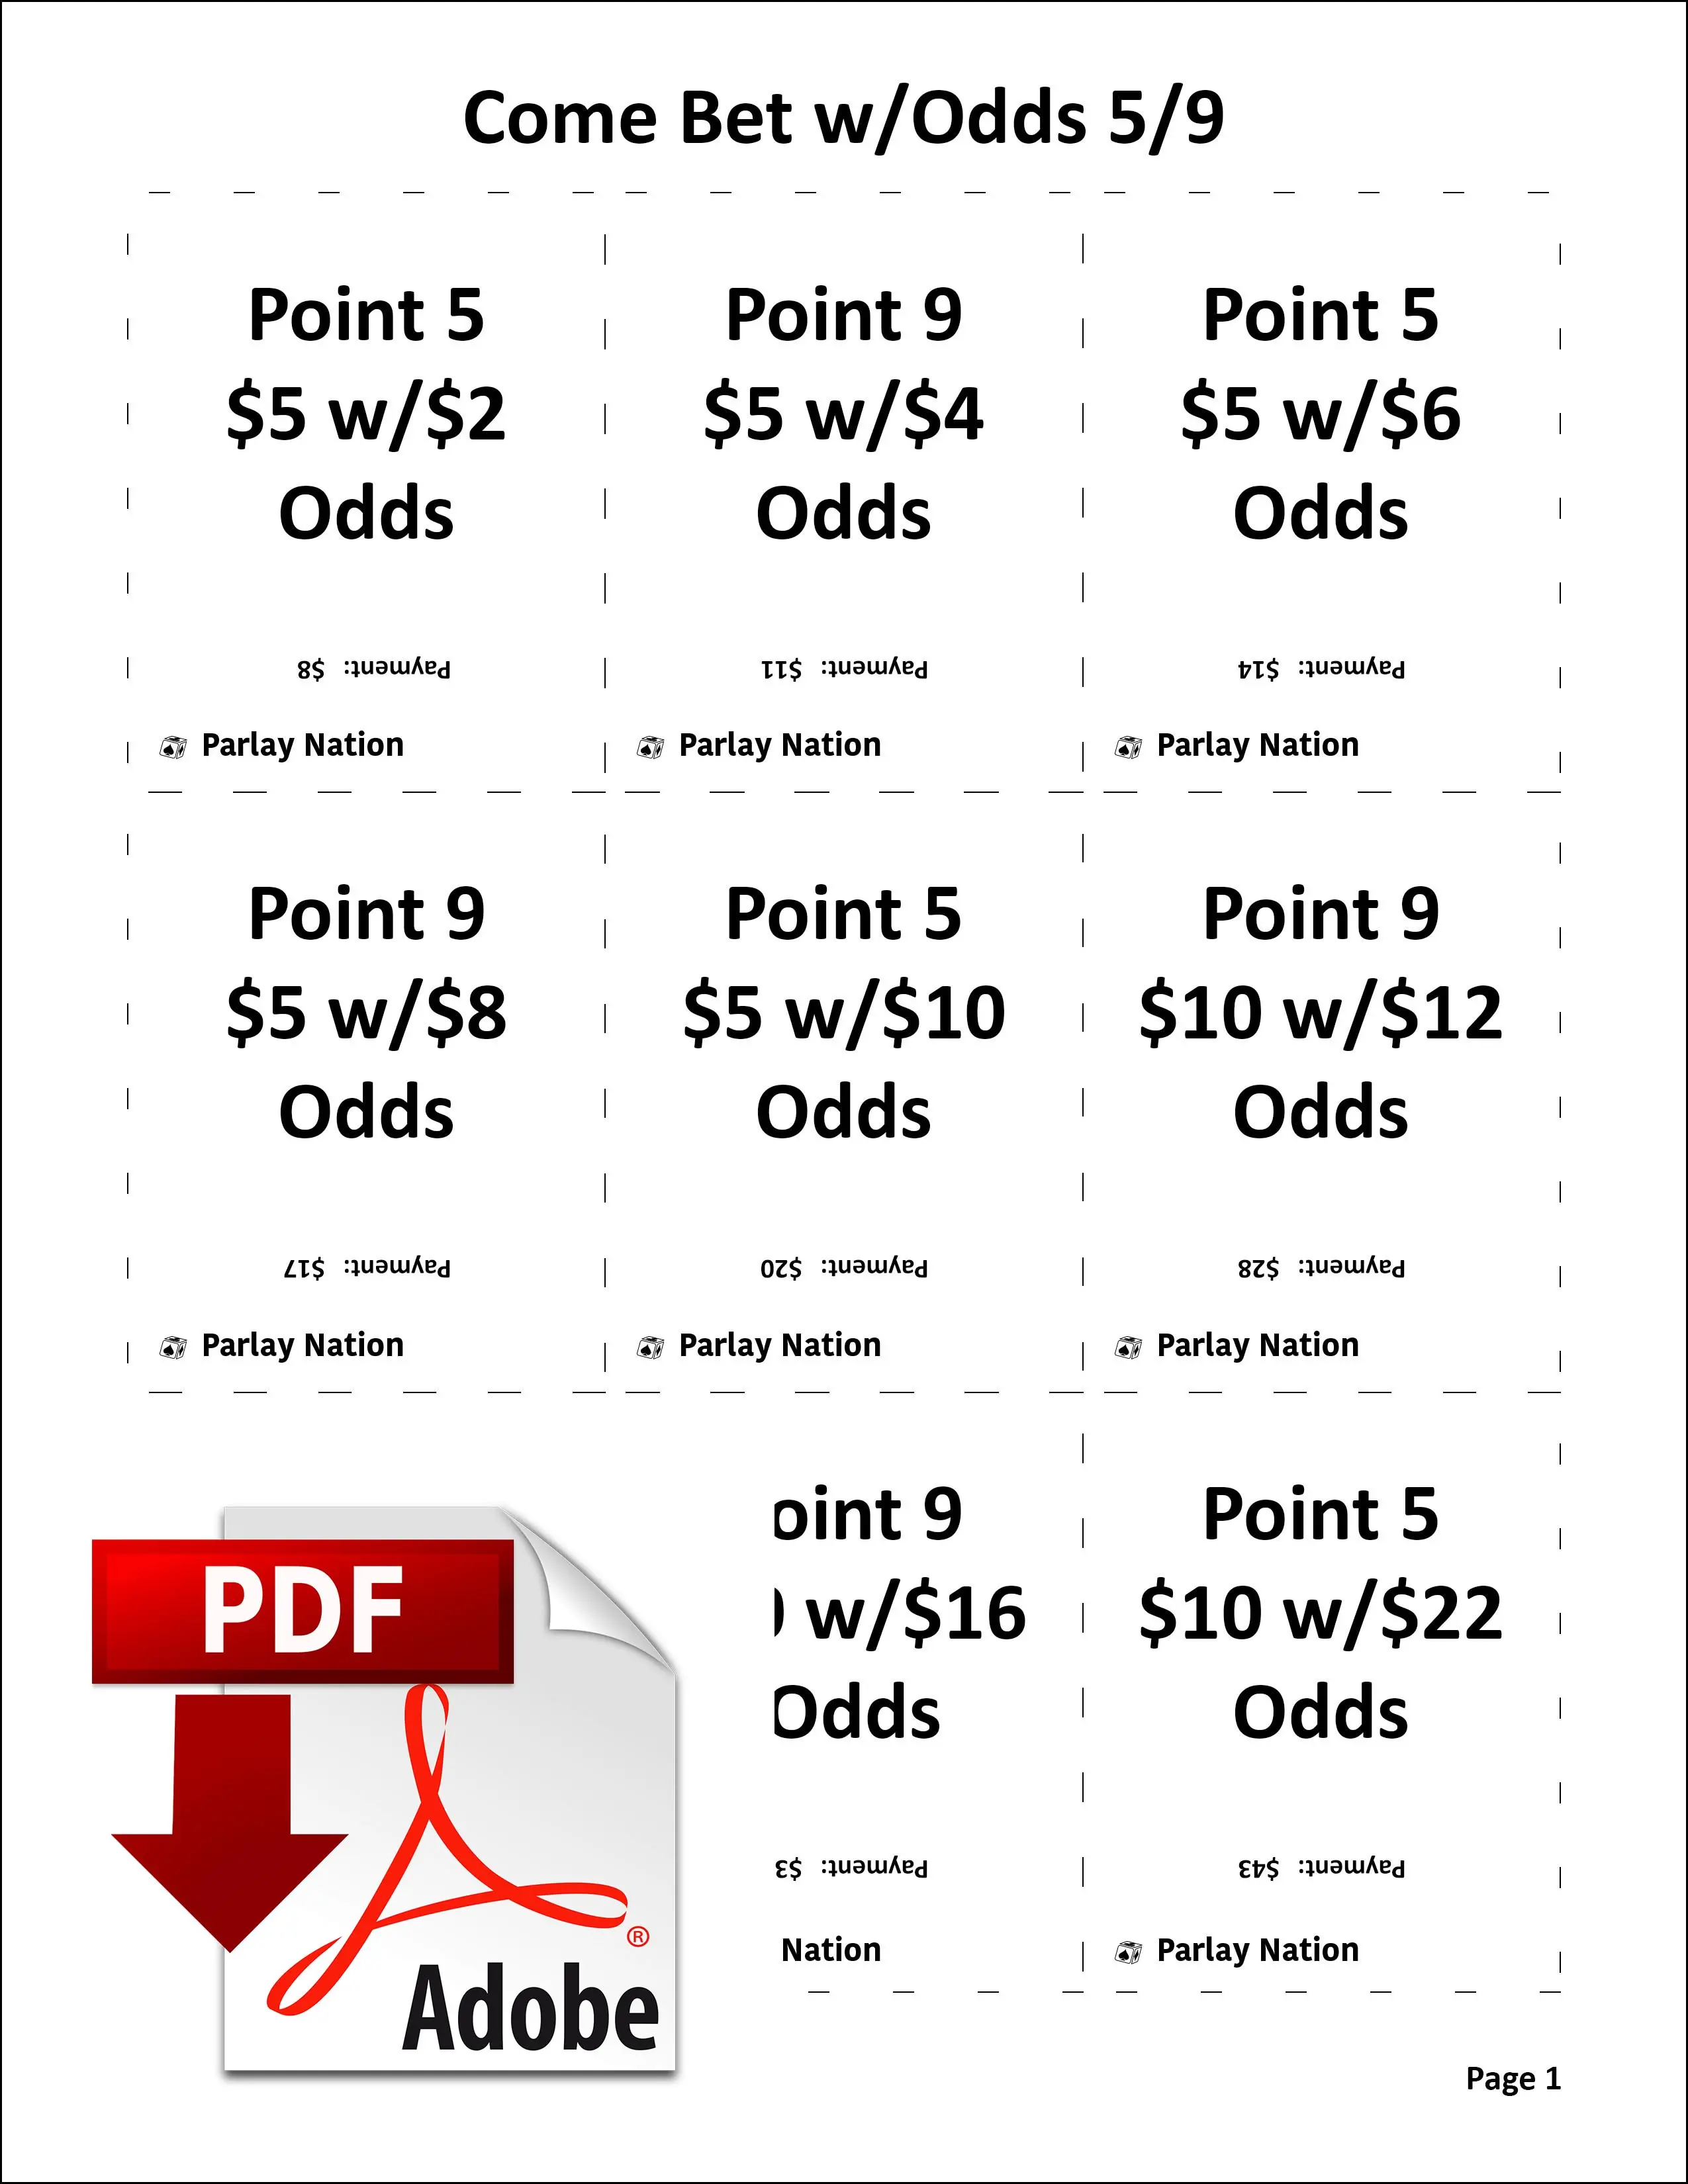 Come Bet w/Odds Payments 5 & 9 cover sheet.